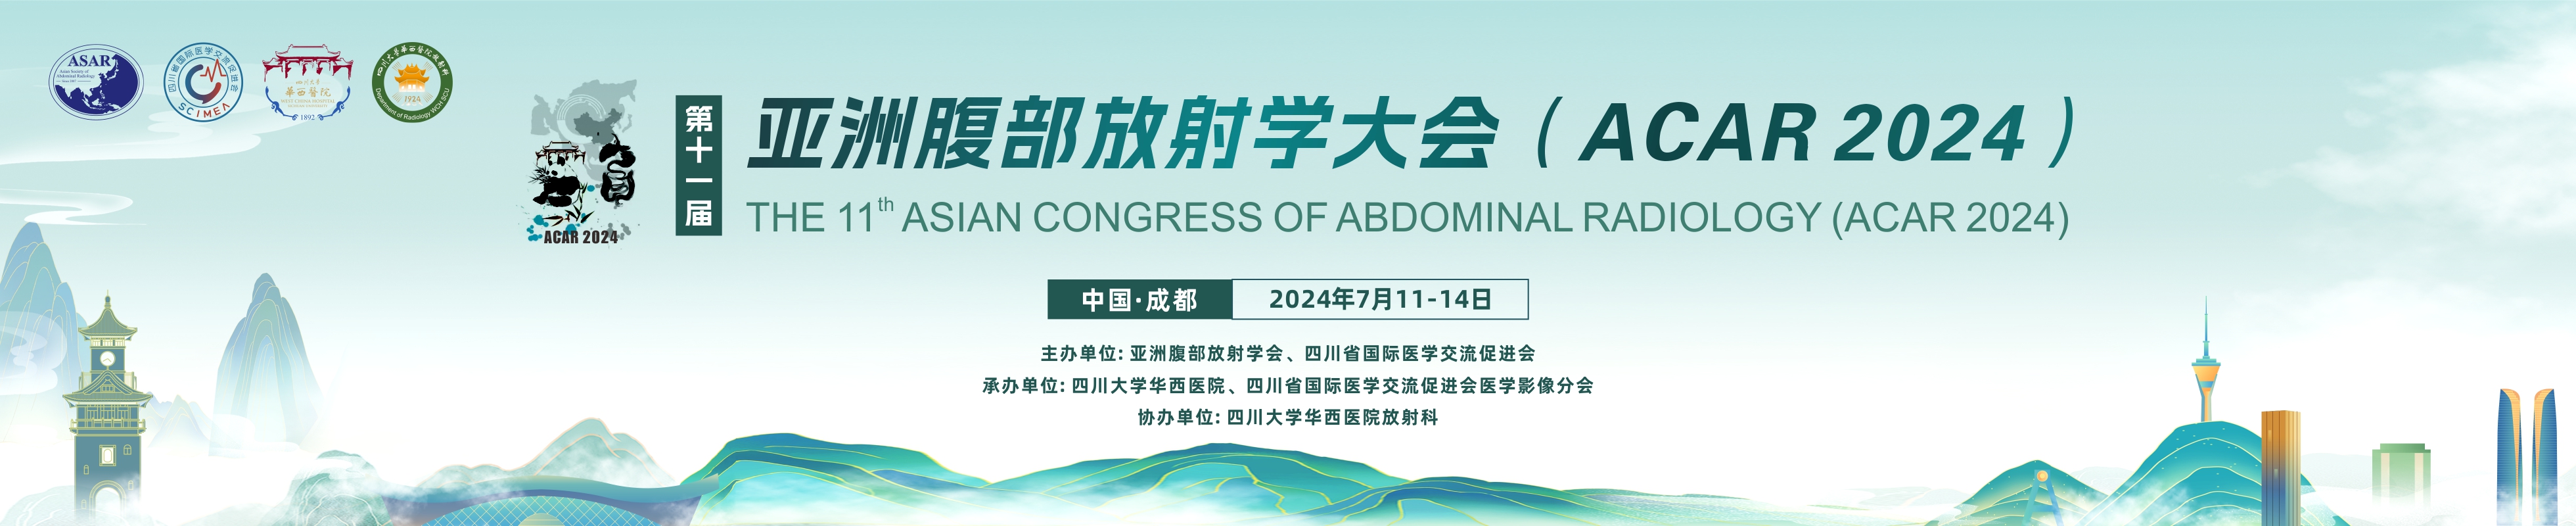 The 11th Asian Abdominal Radiology Conference (ACAR2024)